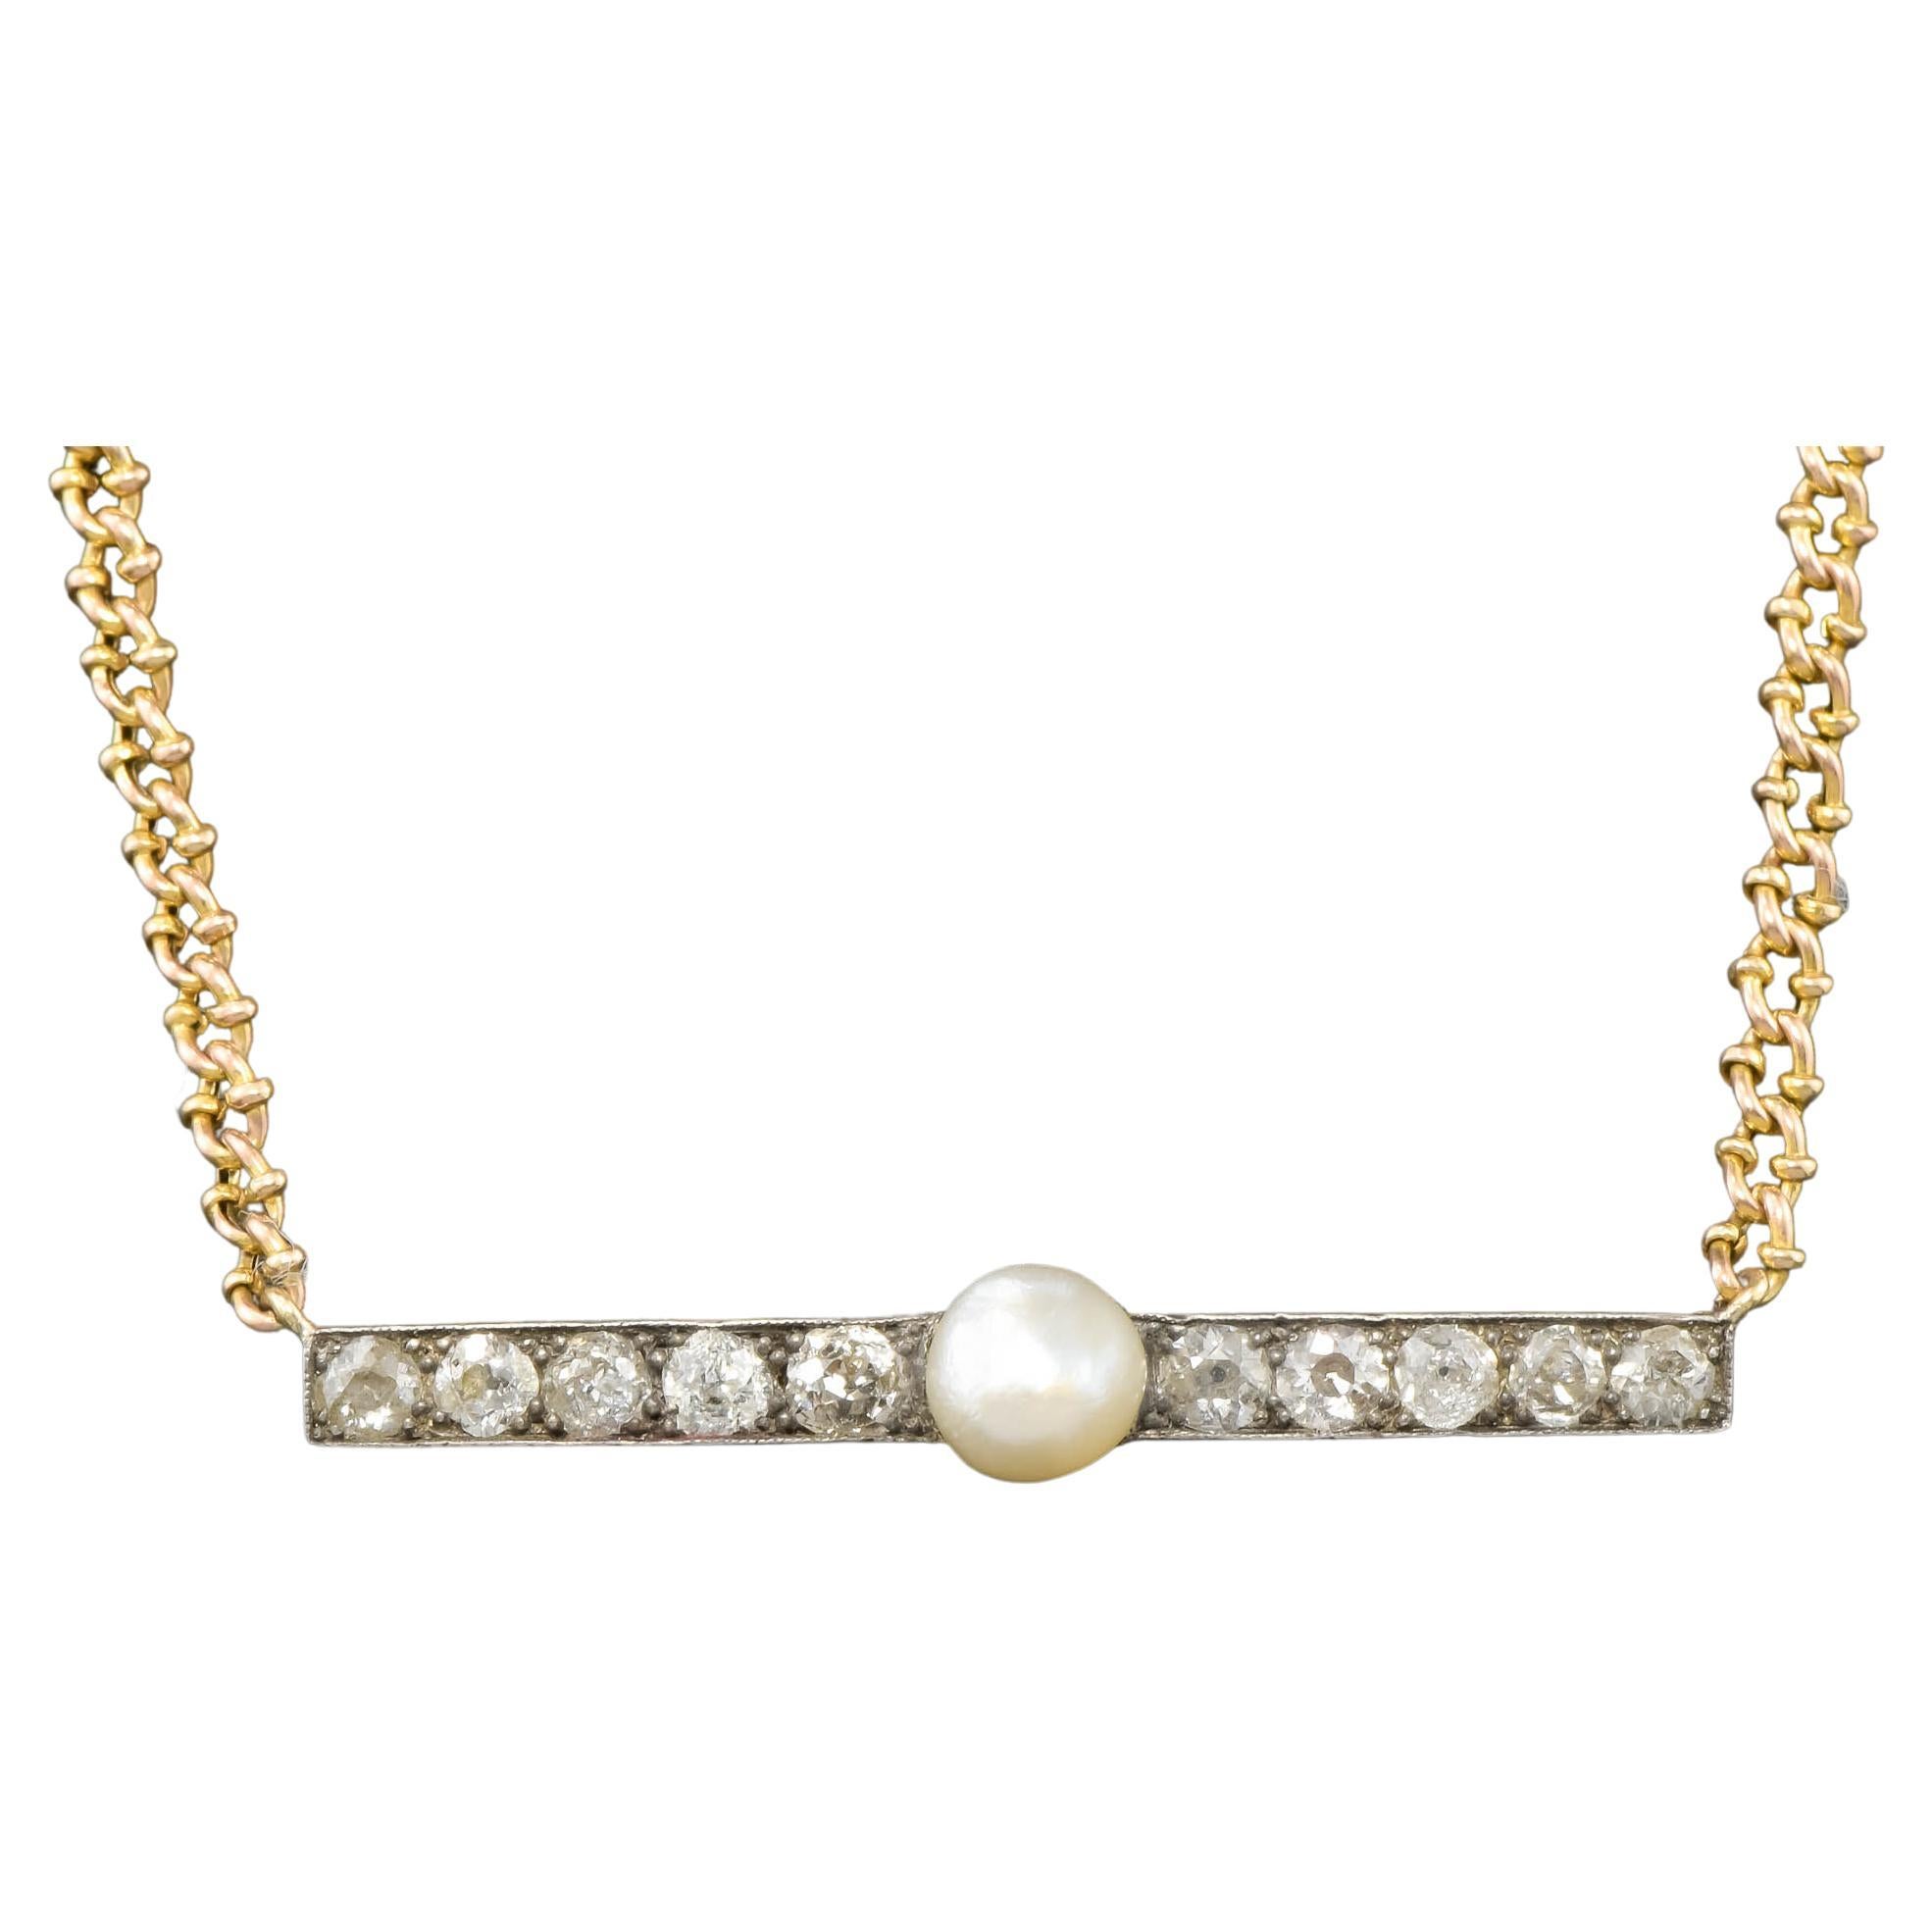 Victorian Diamond Pearl Bar Necklace Conversion with Fancy Link Chain